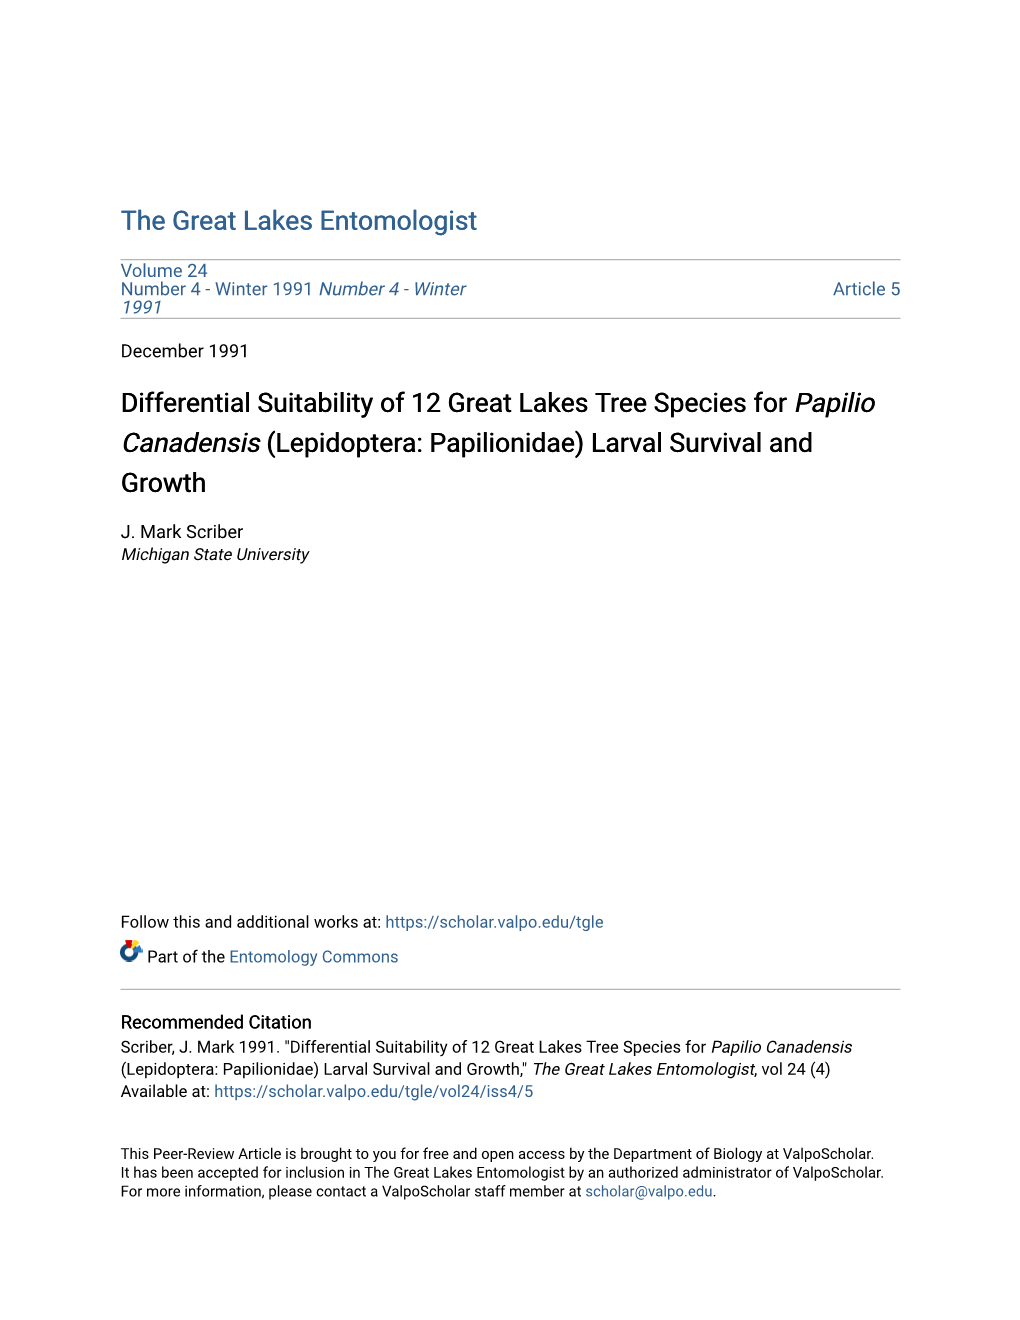 Differential Suitability of 12 Great Lakes Tree Species for Papilio Canadensis (Lepidoptera: Papilionidae) Larval Survival and Growth